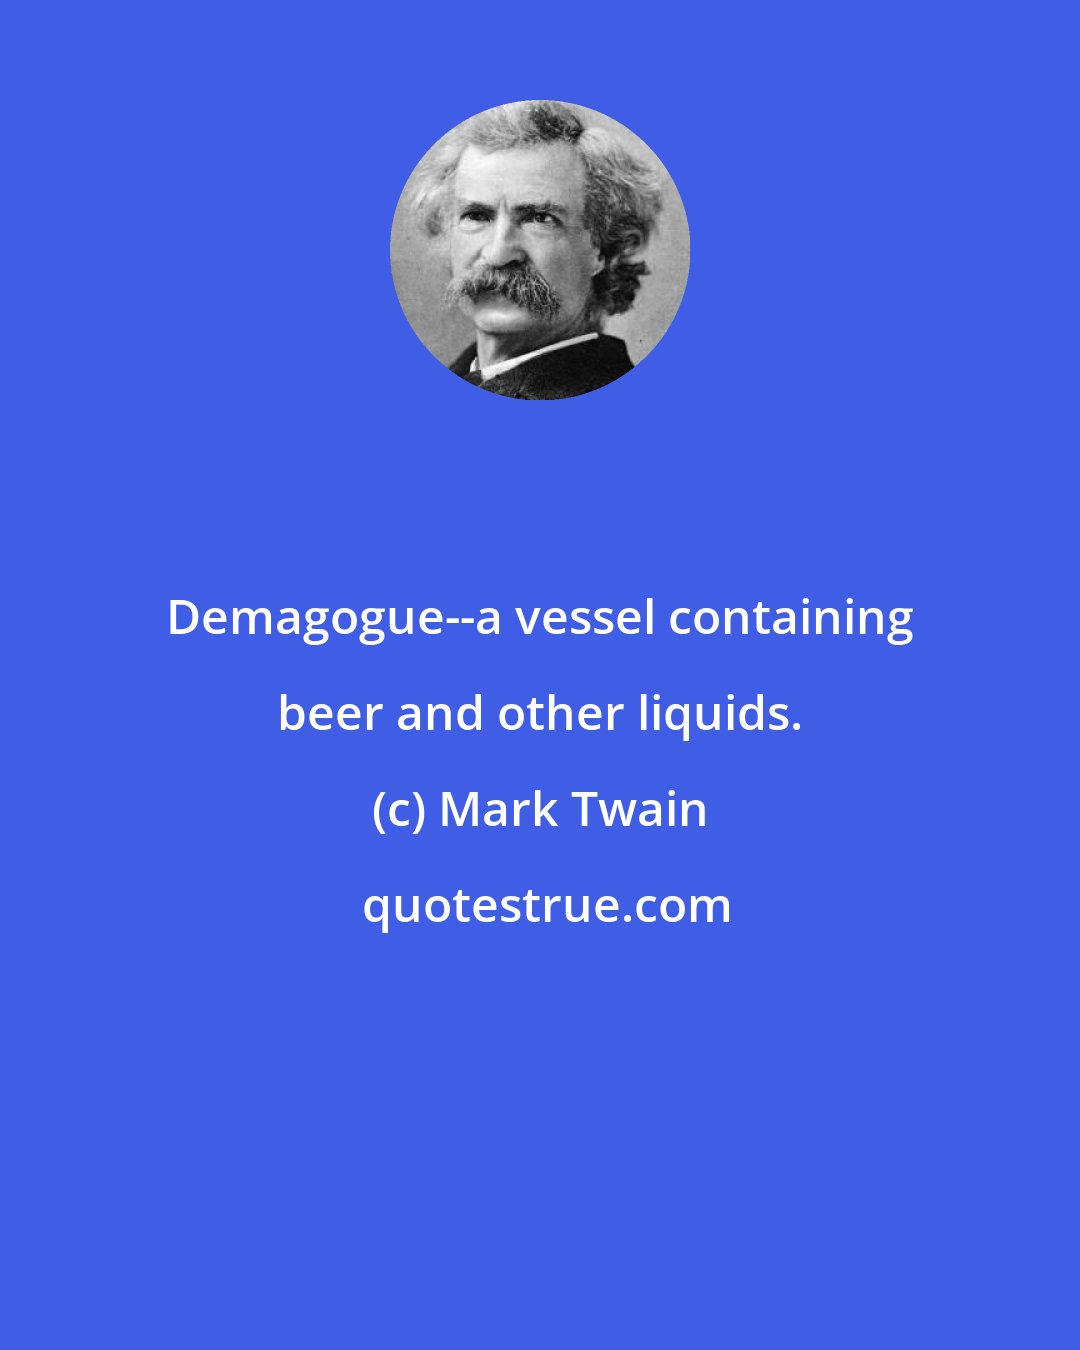 Mark Twain: Demagogue--a vessel containing beer and other liquids.